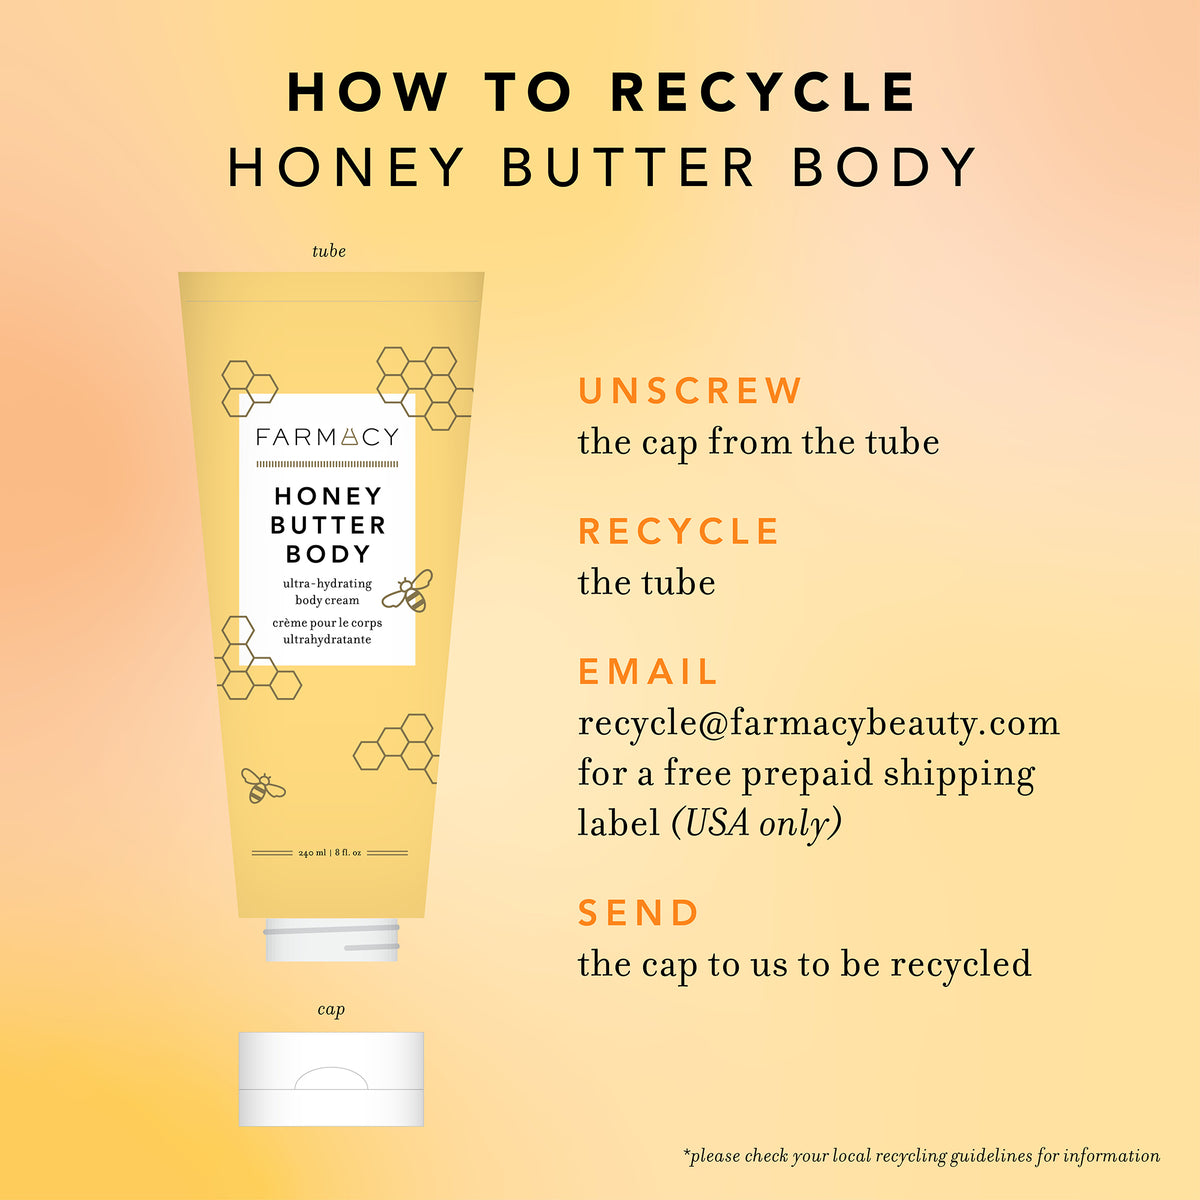 How to recycle Honey Butter Body